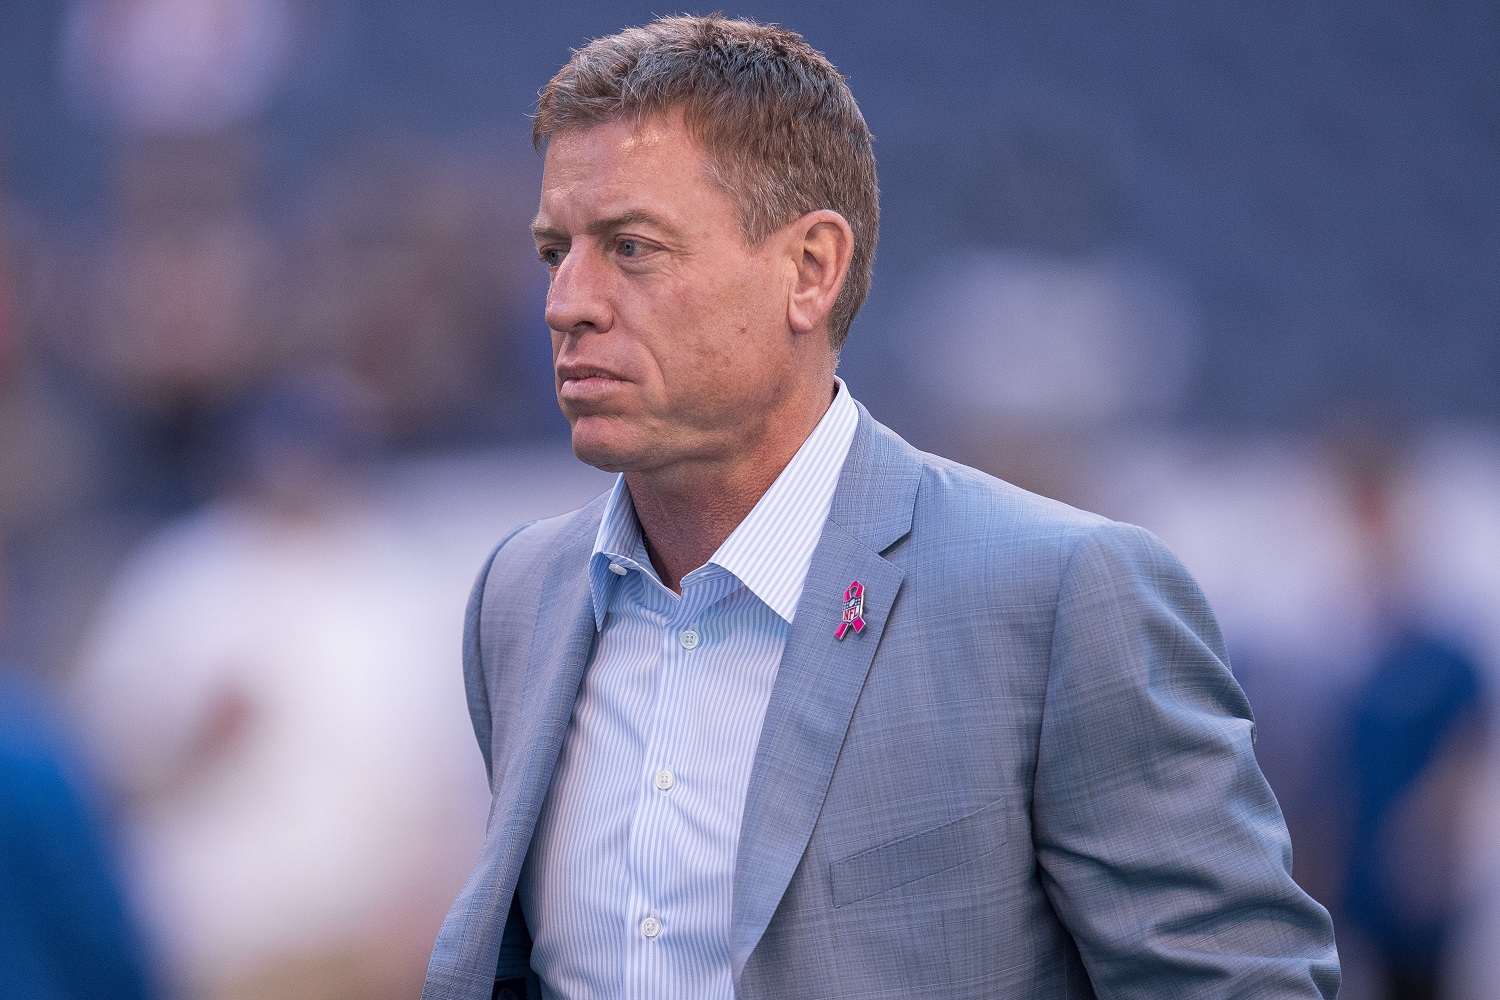 A sit-down with Fox's Troy Aikman revealed: GM aspirations